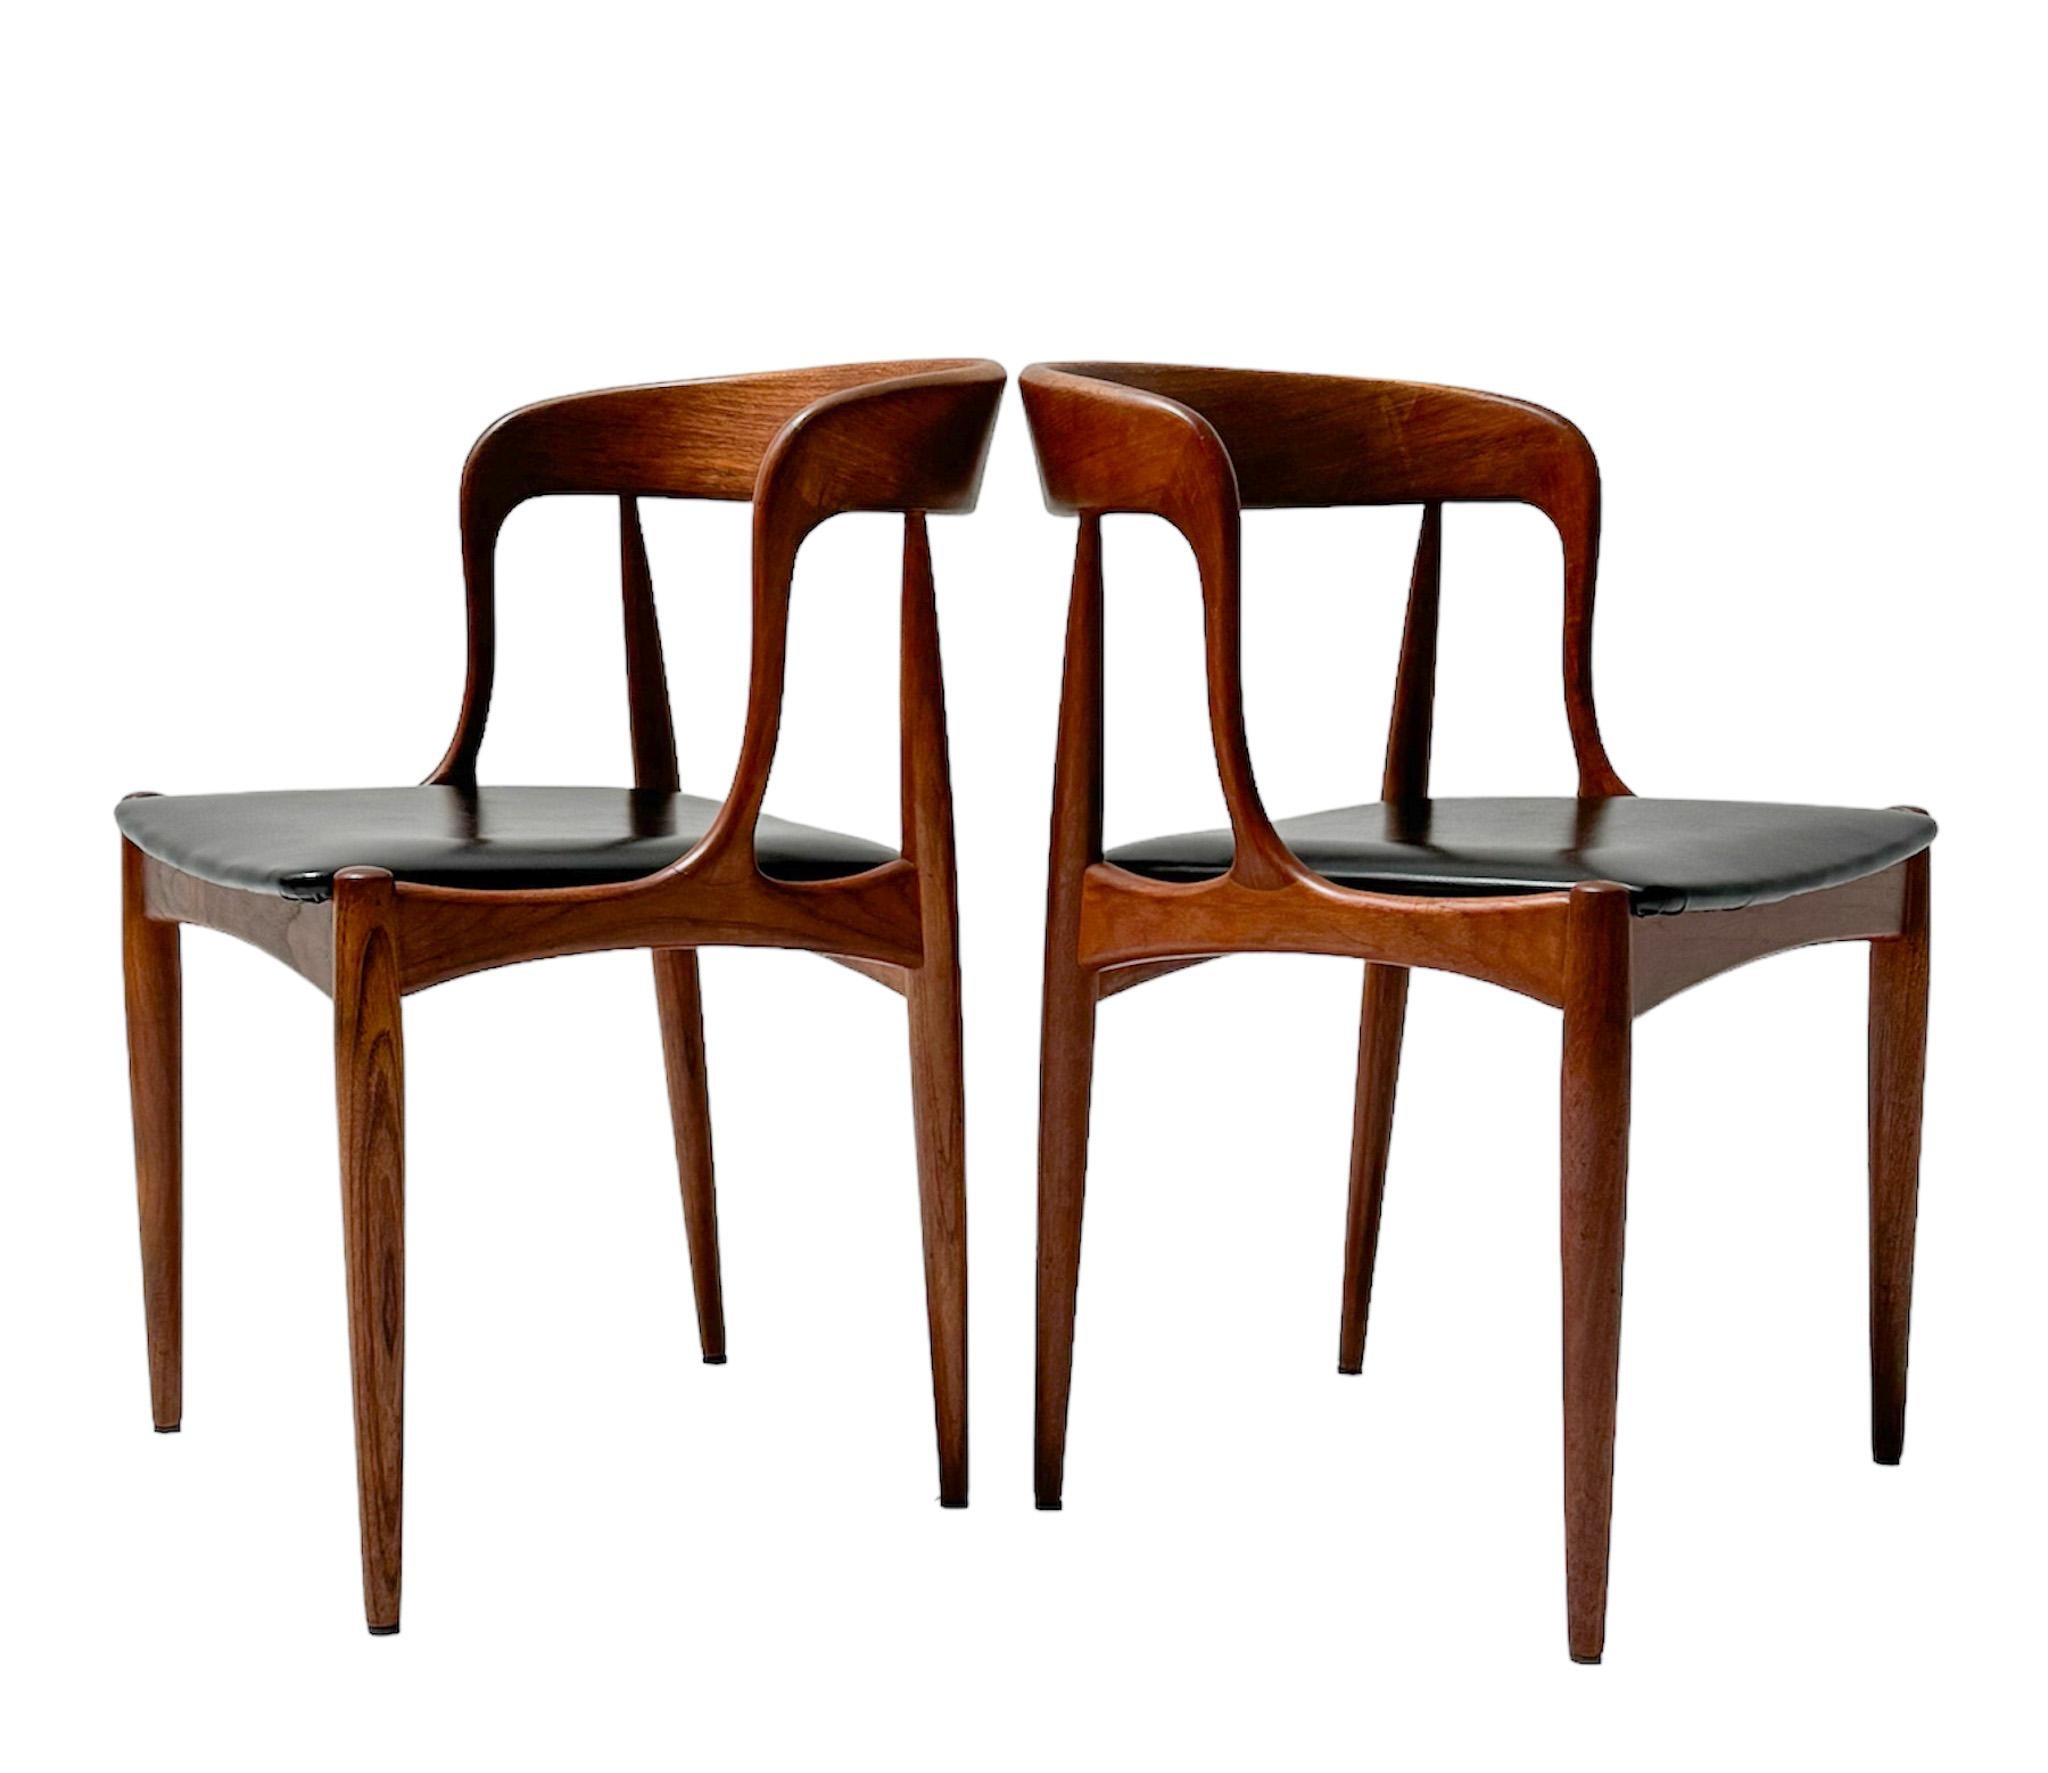 Four Teak Mid-Century Modern Dining Chairs by Johannes Andersen for Uldum, 1960s For Sale 2